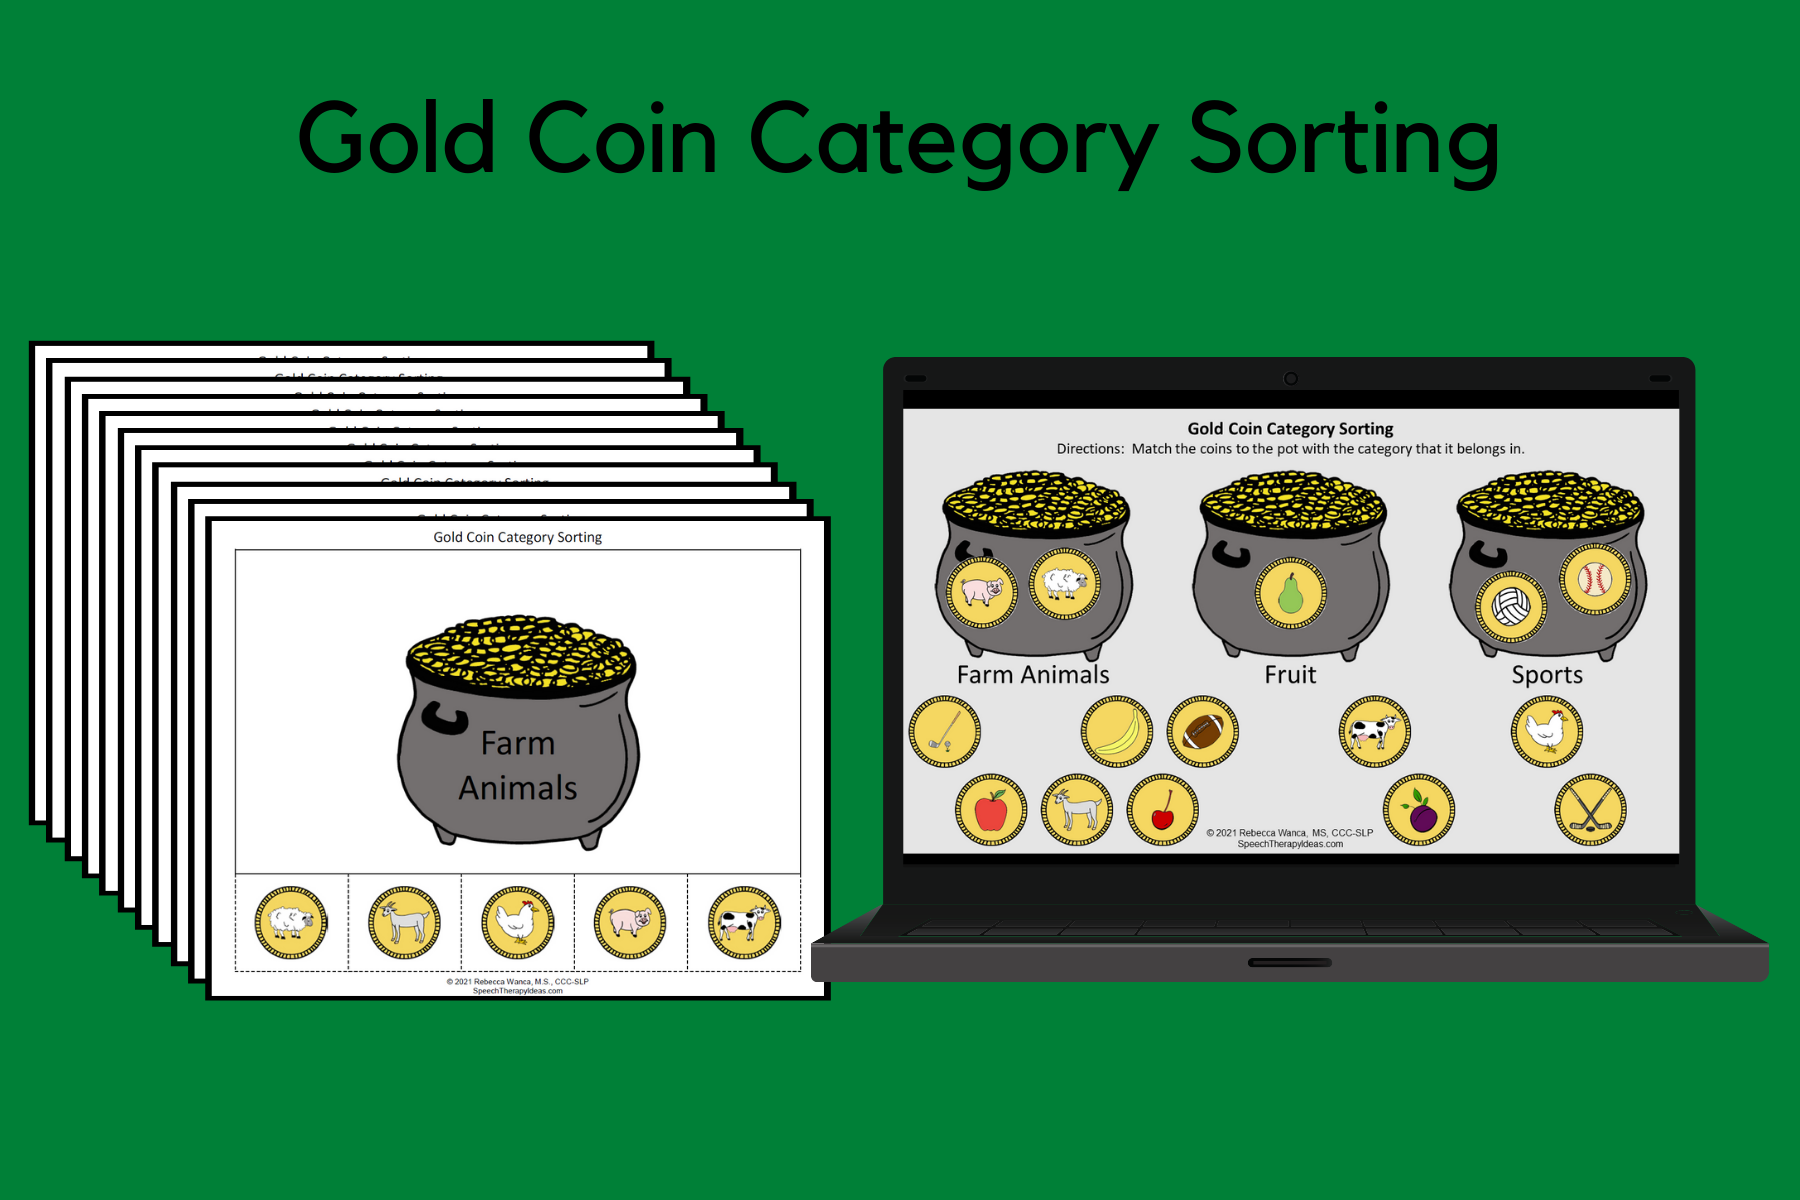 Gold Coin Category Sorting